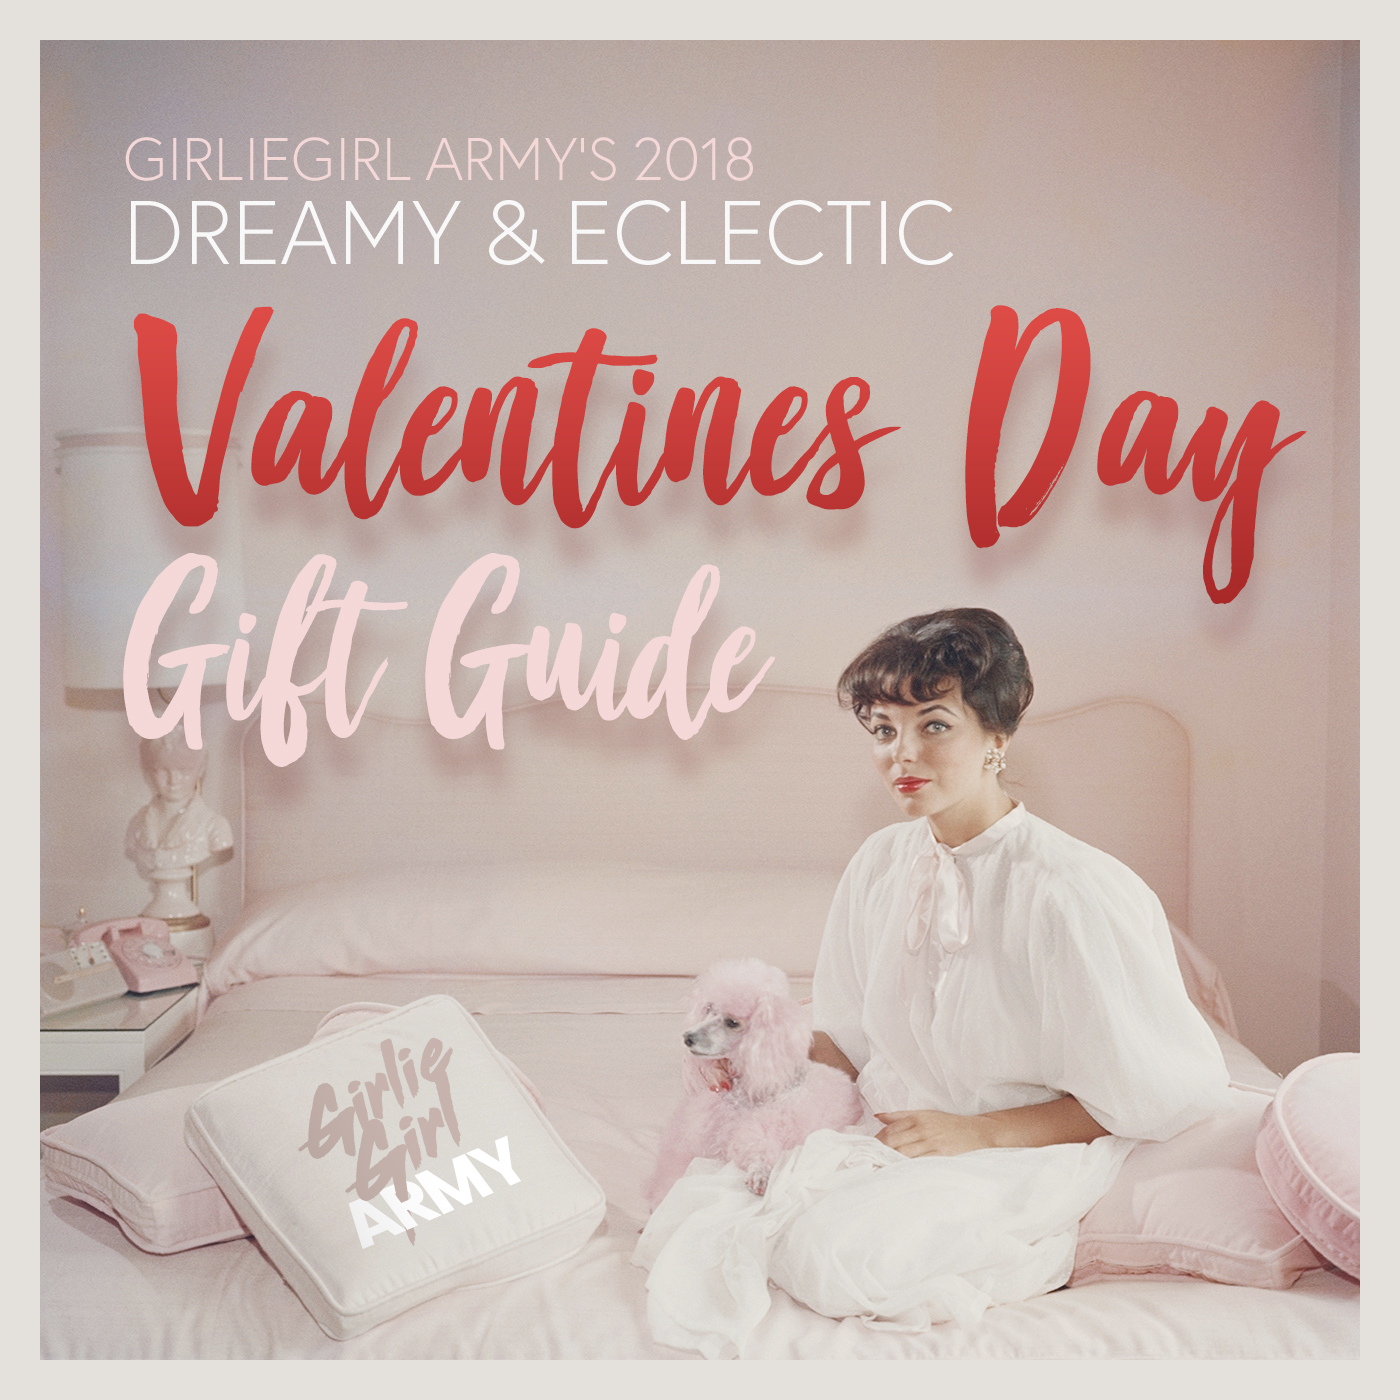 GirlieGirl Army's 2018 Dreamy & Eclectic Valentine's Day Gift Guide